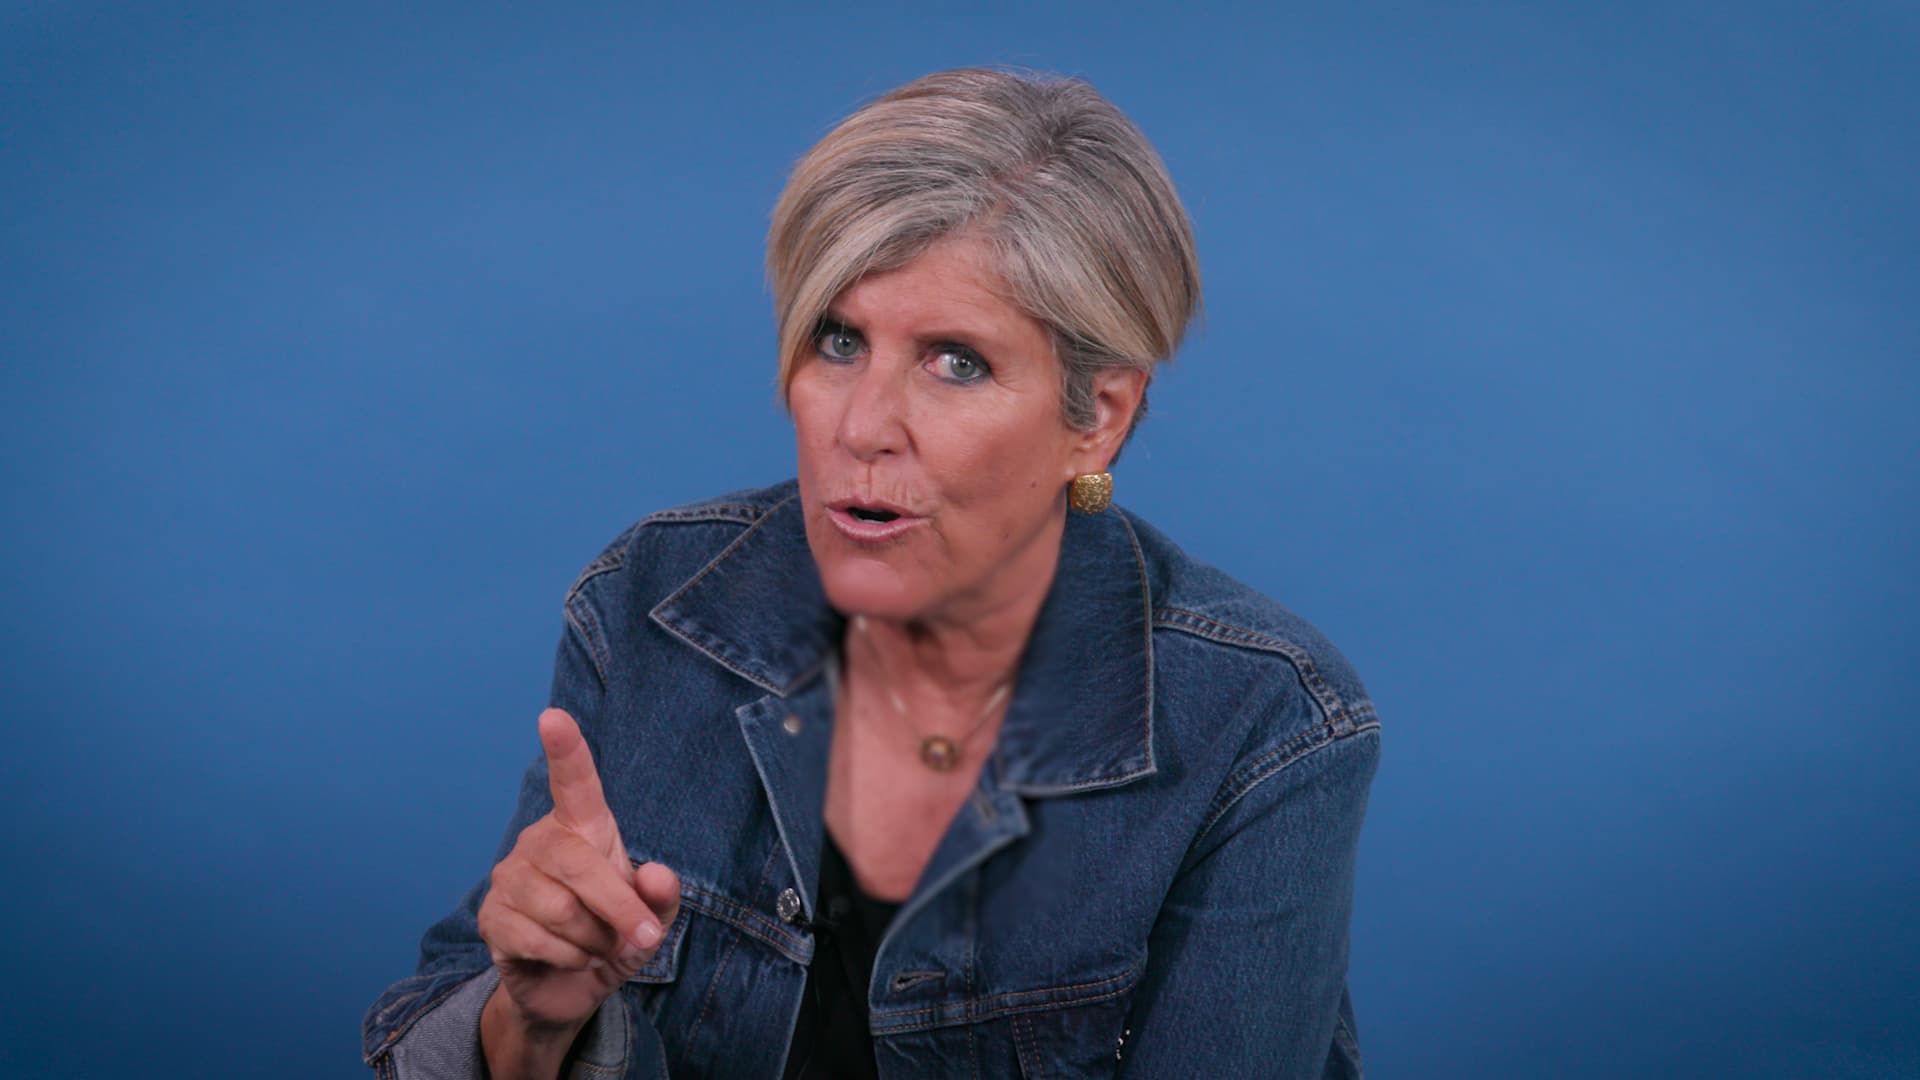 Suze Orman has a warning for those who want to quit in the Great Resignation